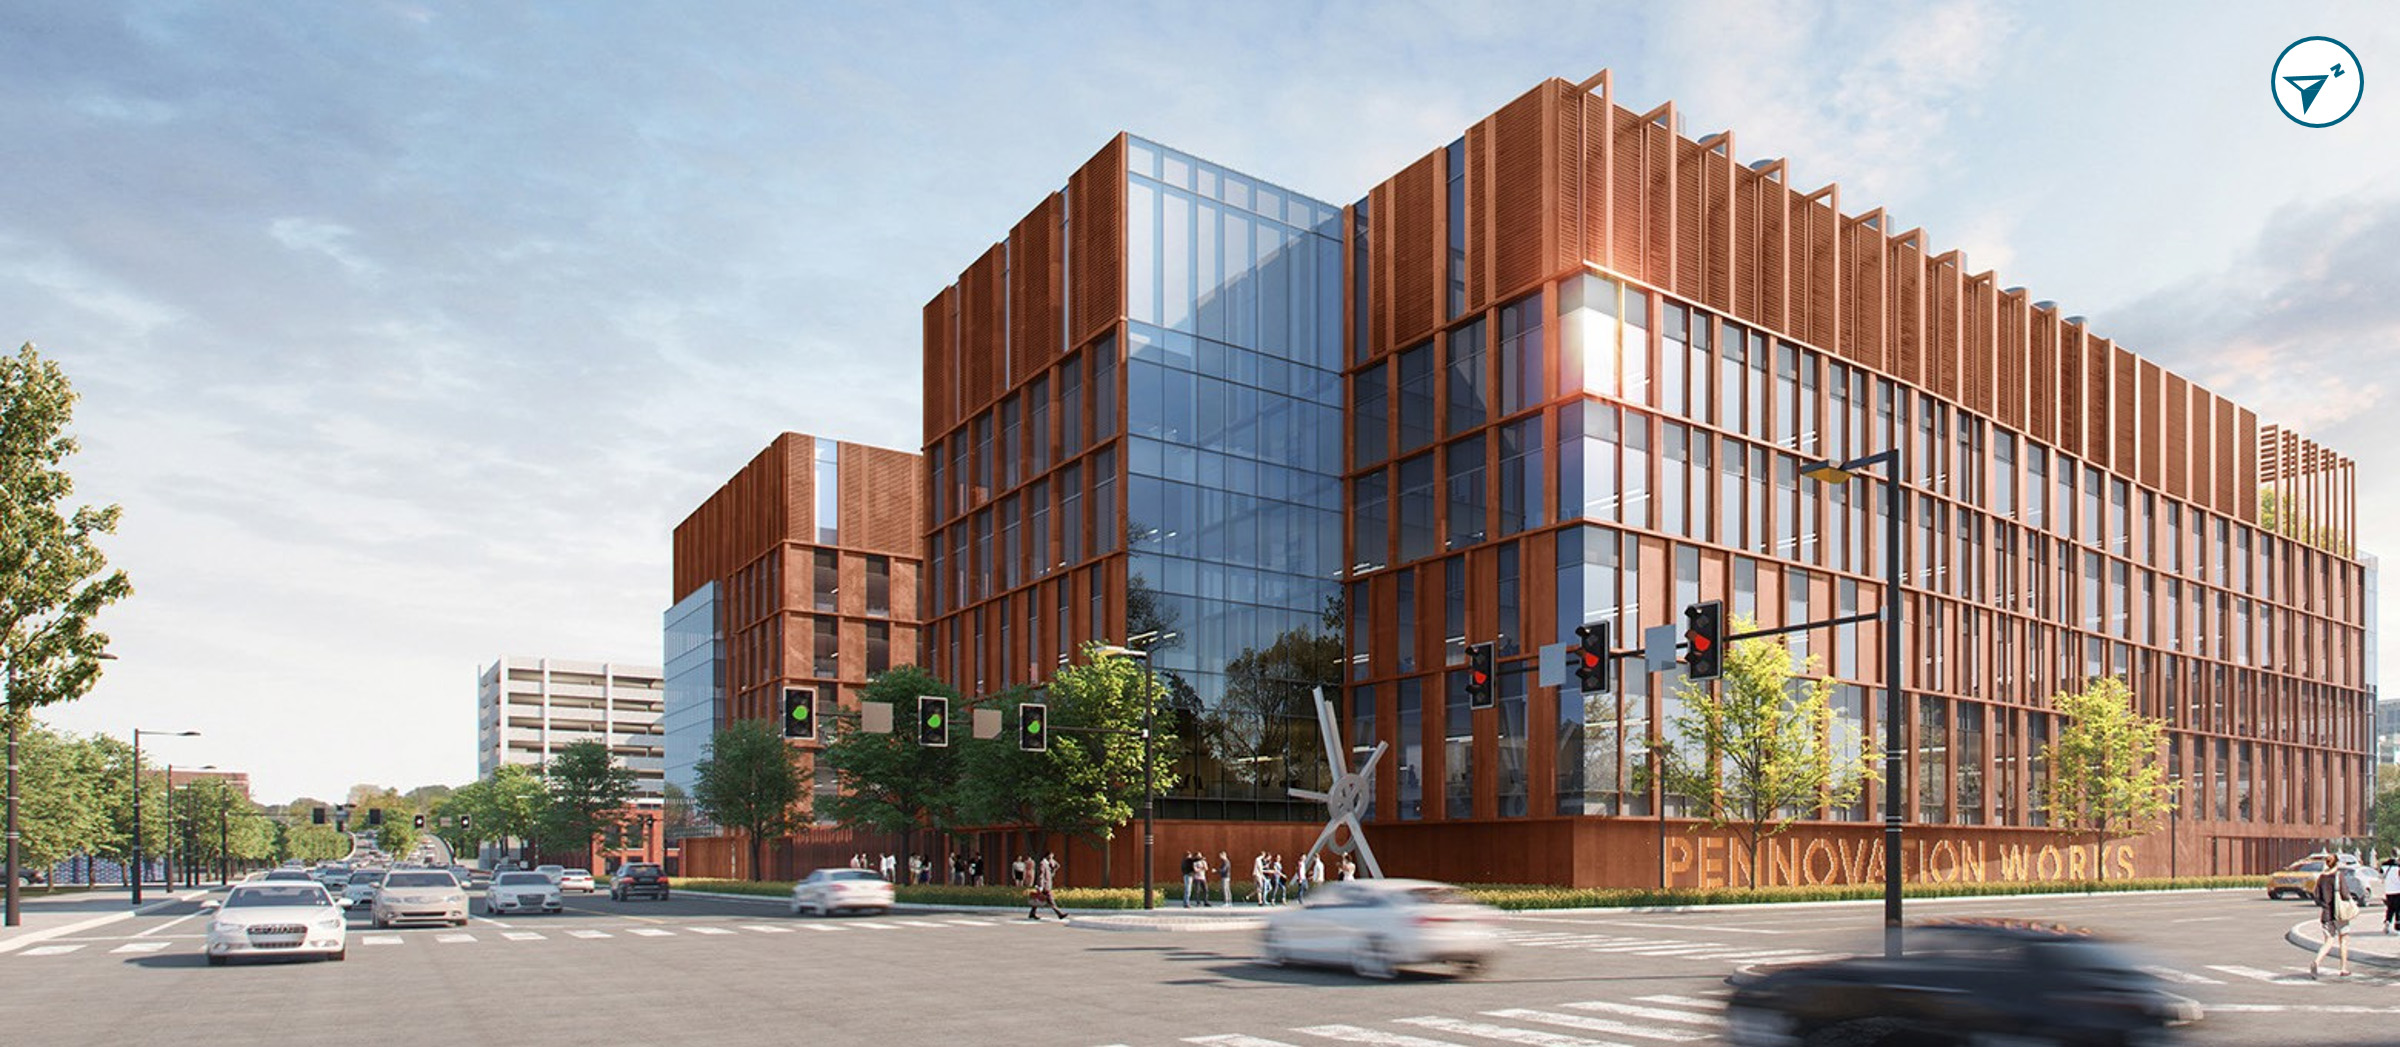 Rendering of the planned new life sciences development on the Pennovation Works site